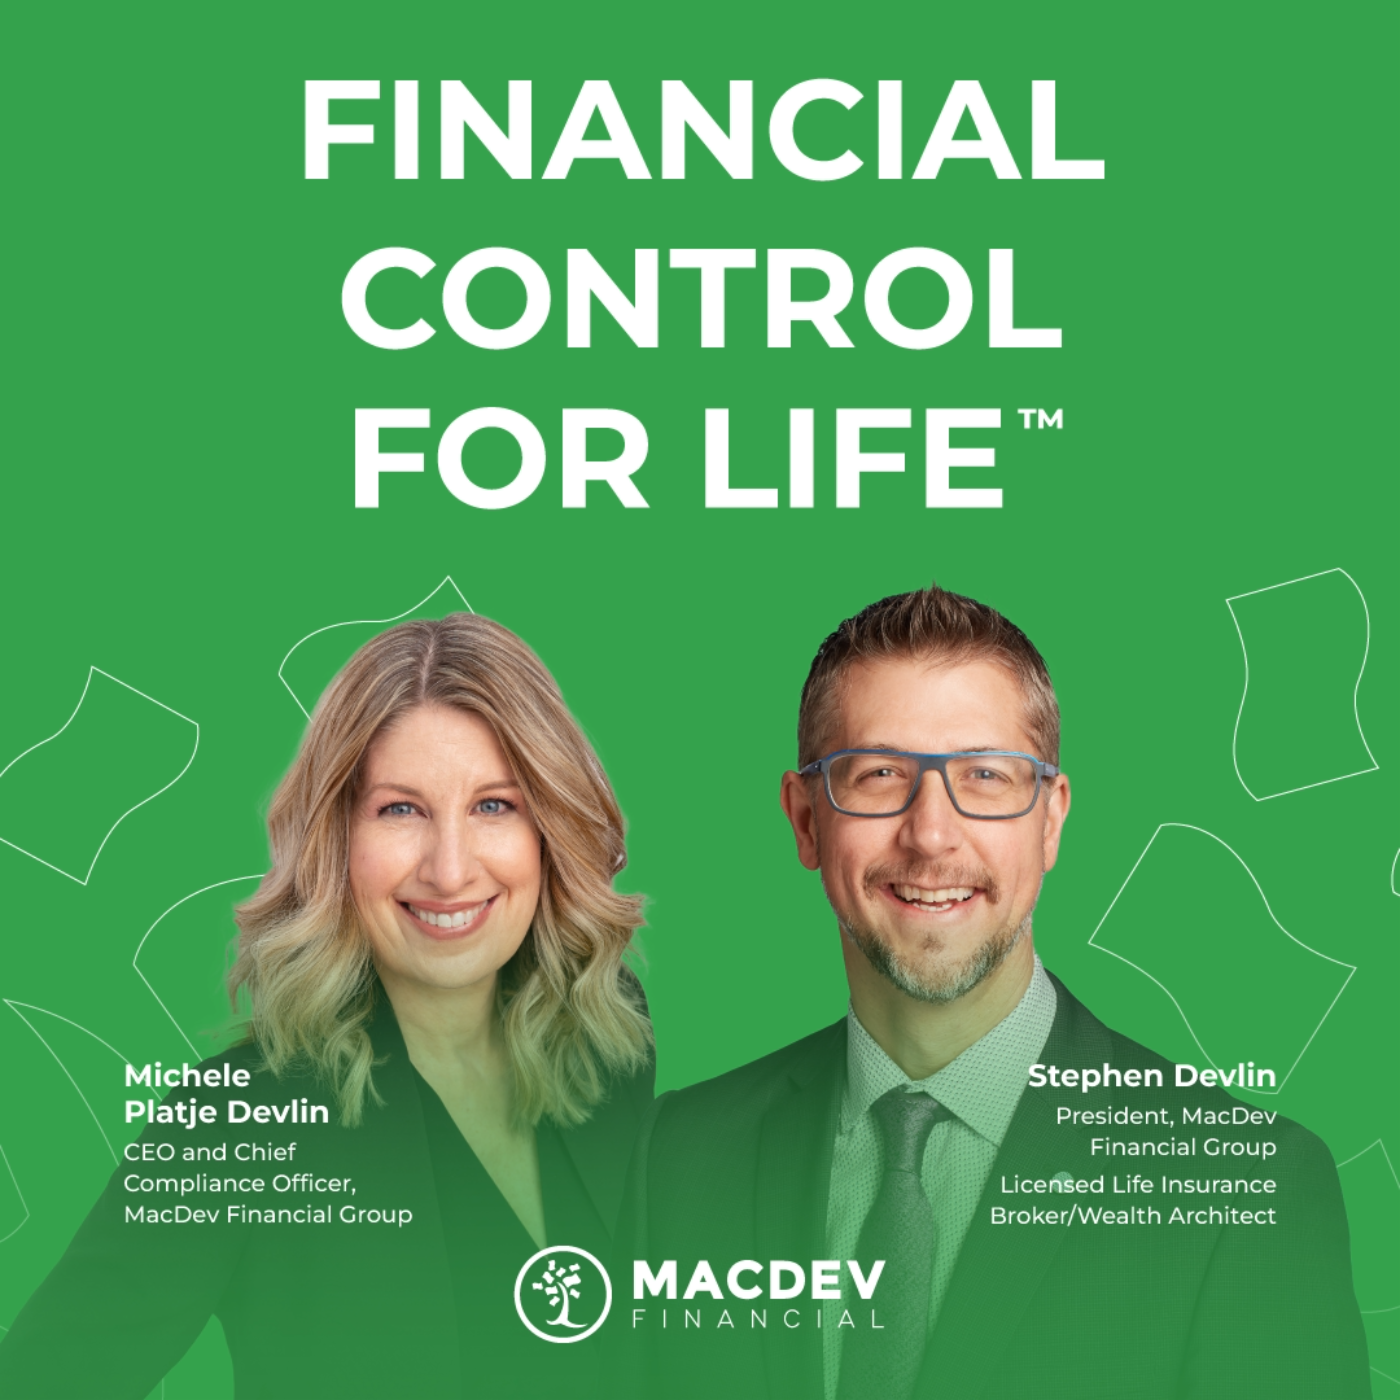 Financial Control for Life™